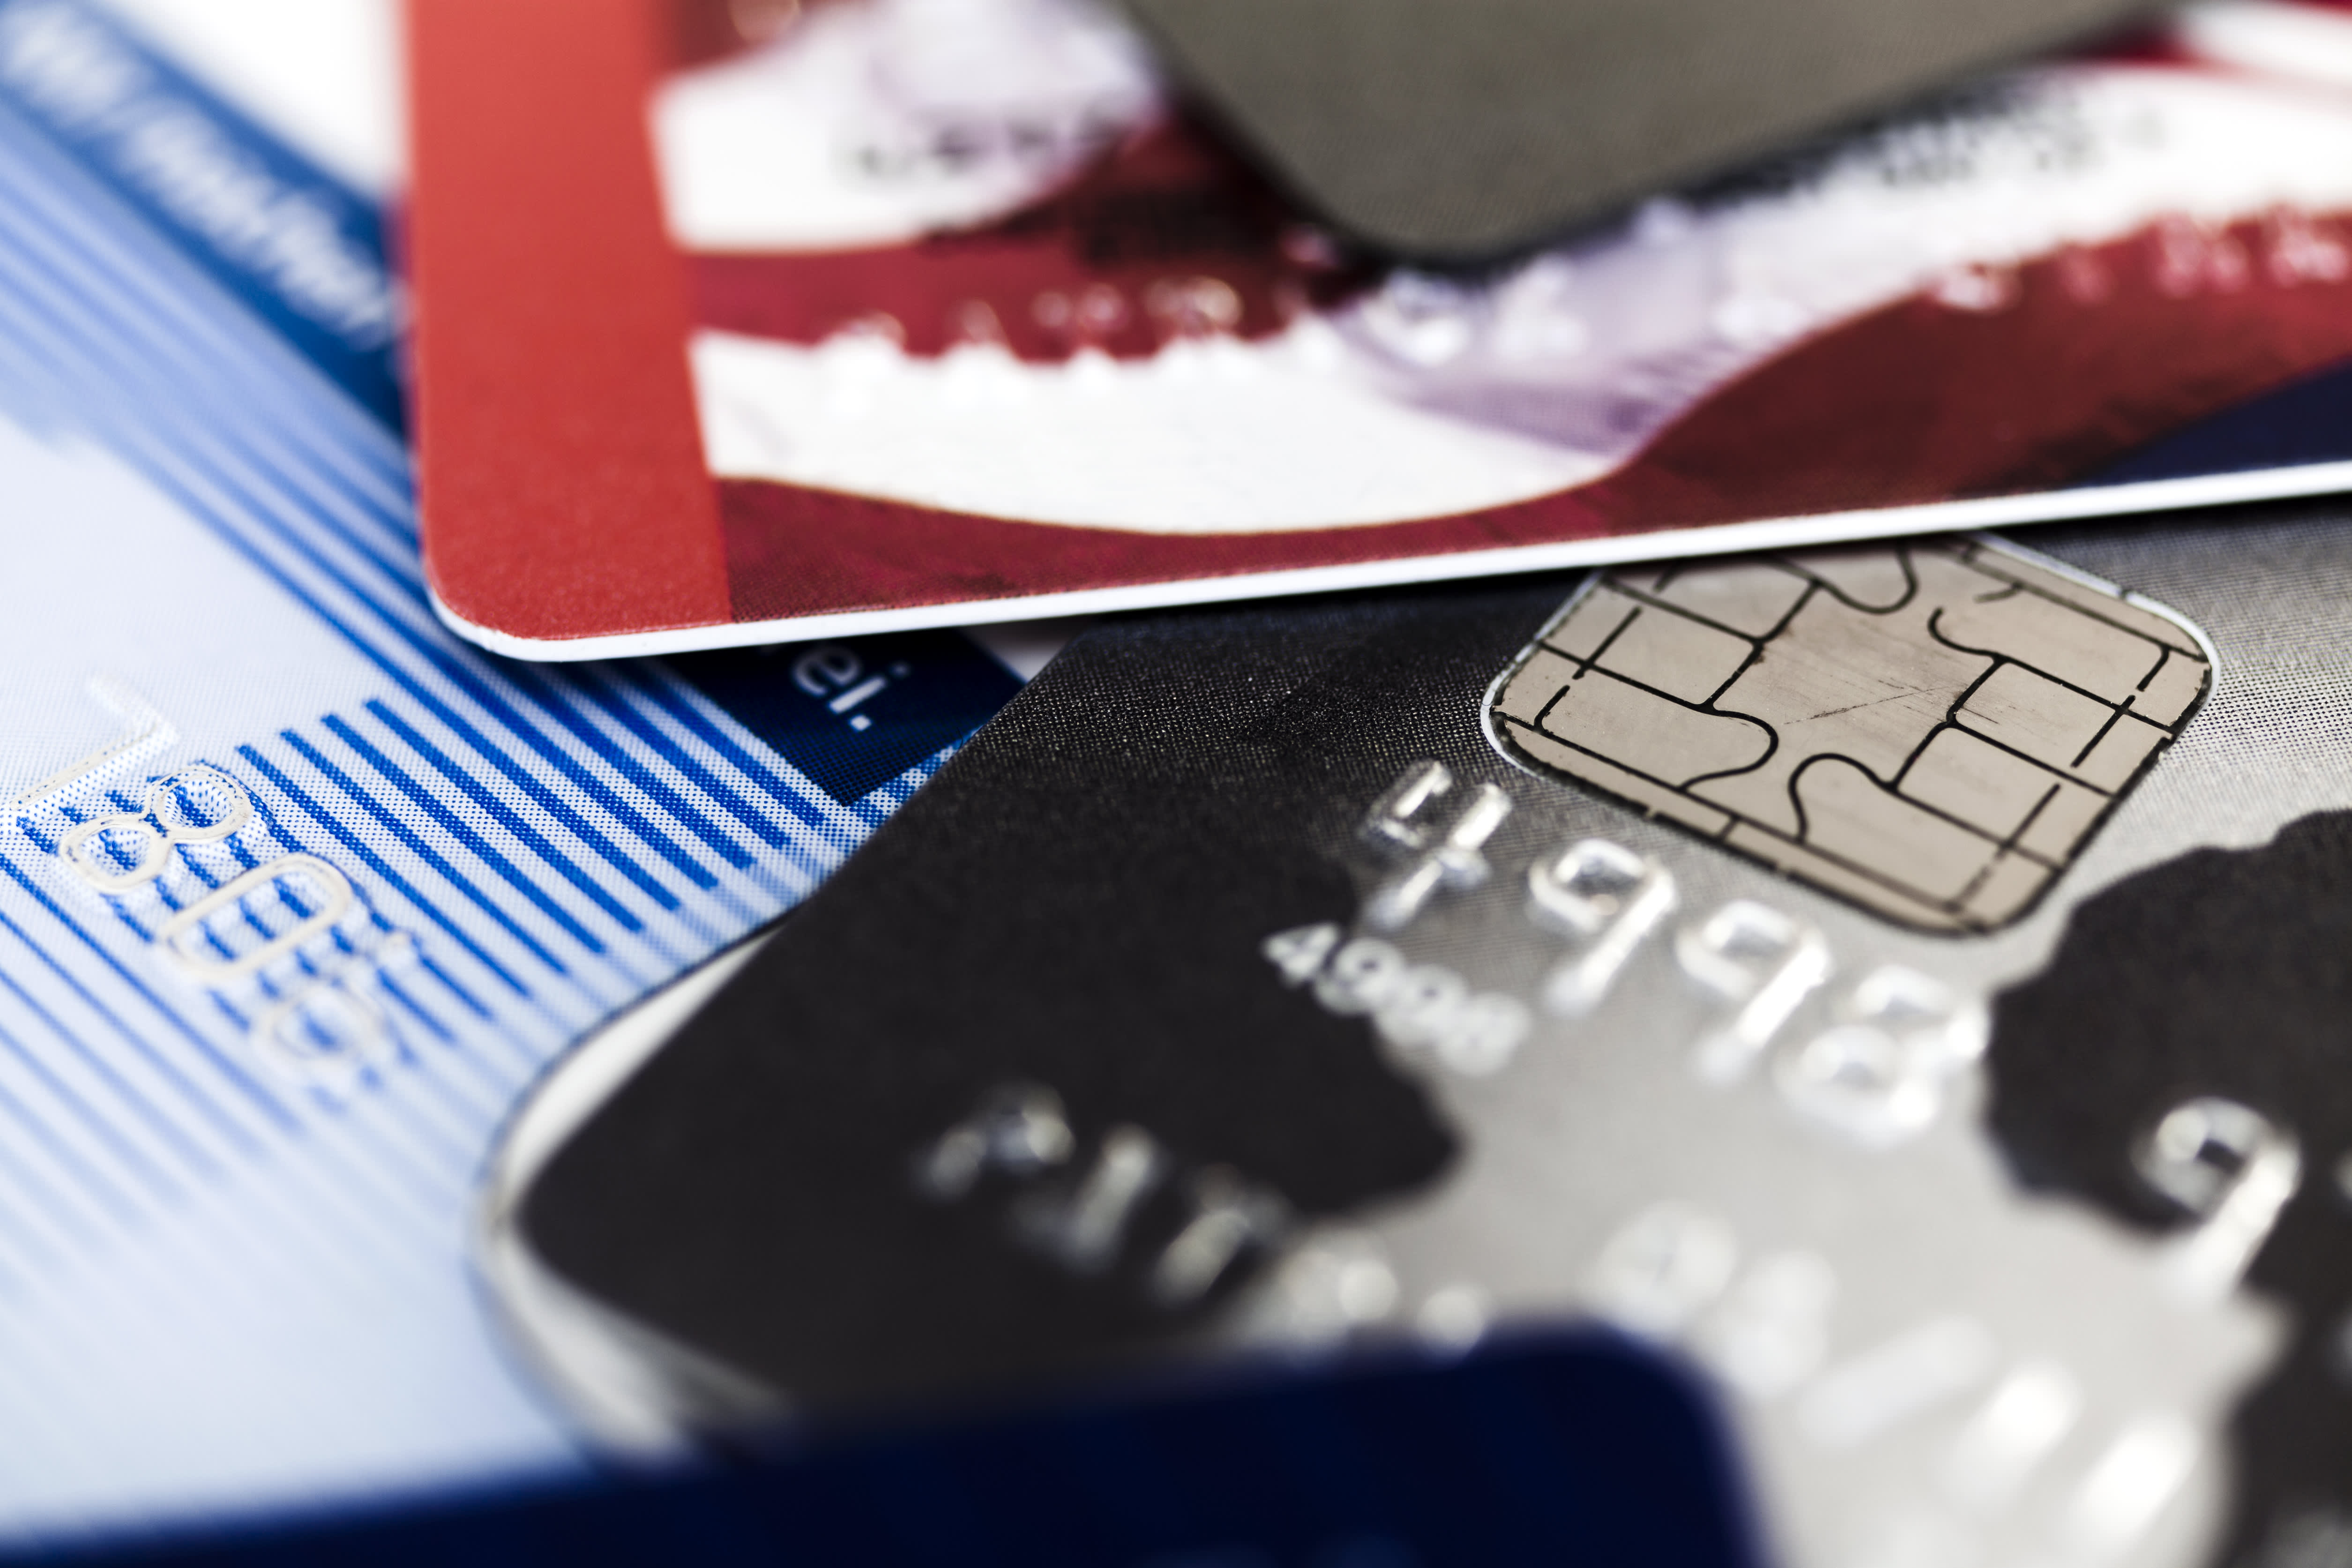 The Federal Reserve Bank of New York says credit card delinquencies rose in 2023, indicating “financial stress.”